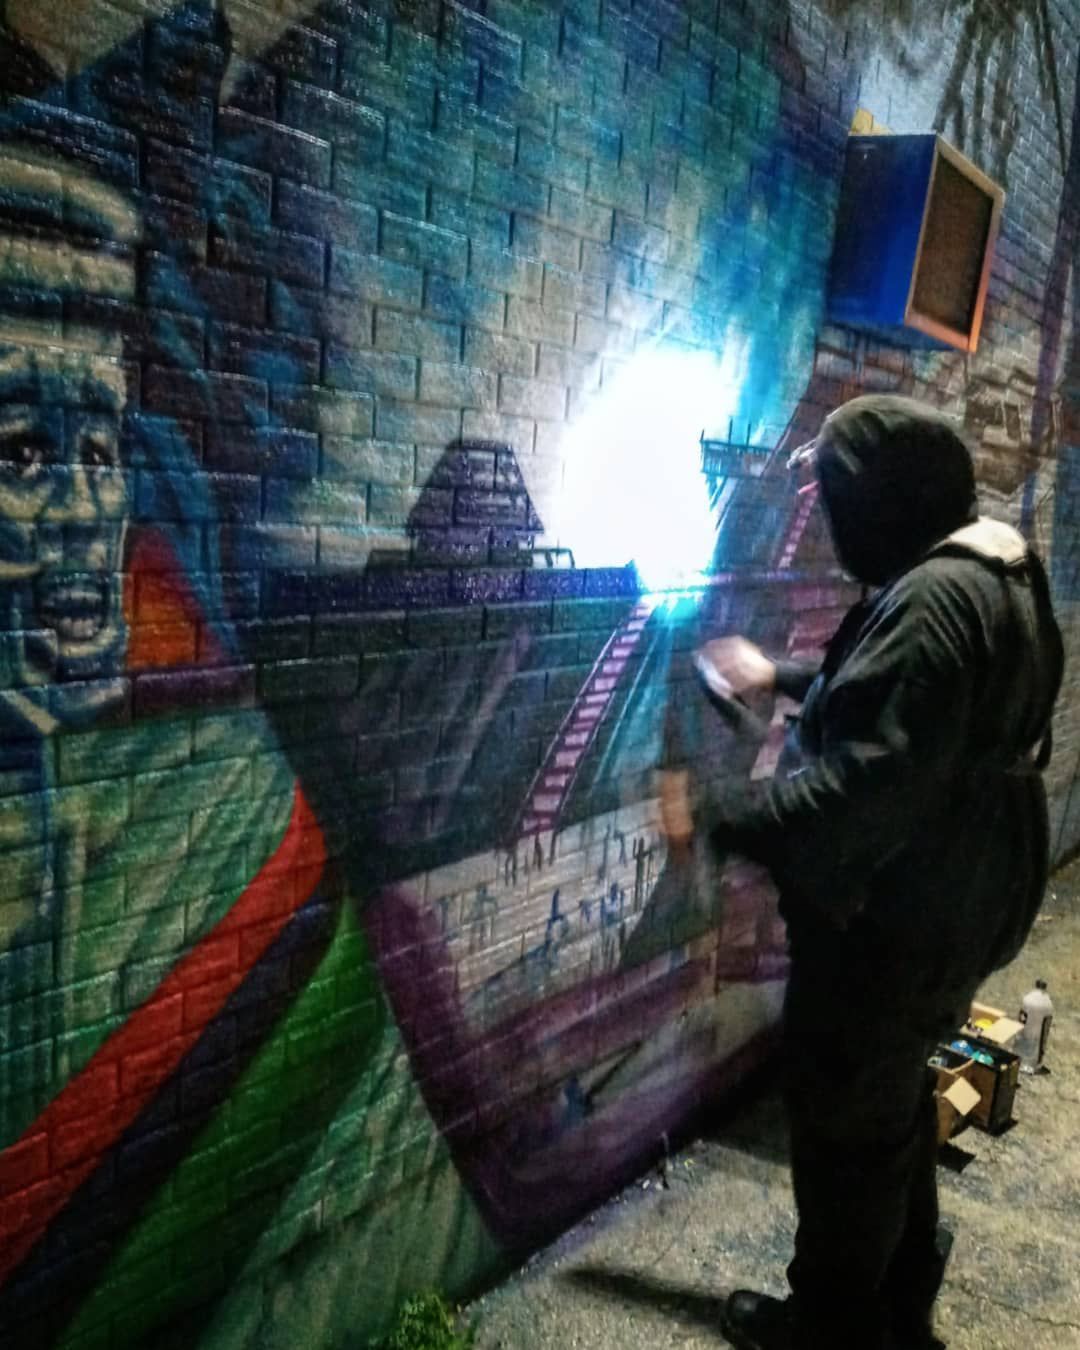 Joliet artist Sonryze works on the scenes of Cahokia — a once-bustling Native American metropolis in southern Illinois, part of a new mural in progress at the Spanish Community Center in Joliet.